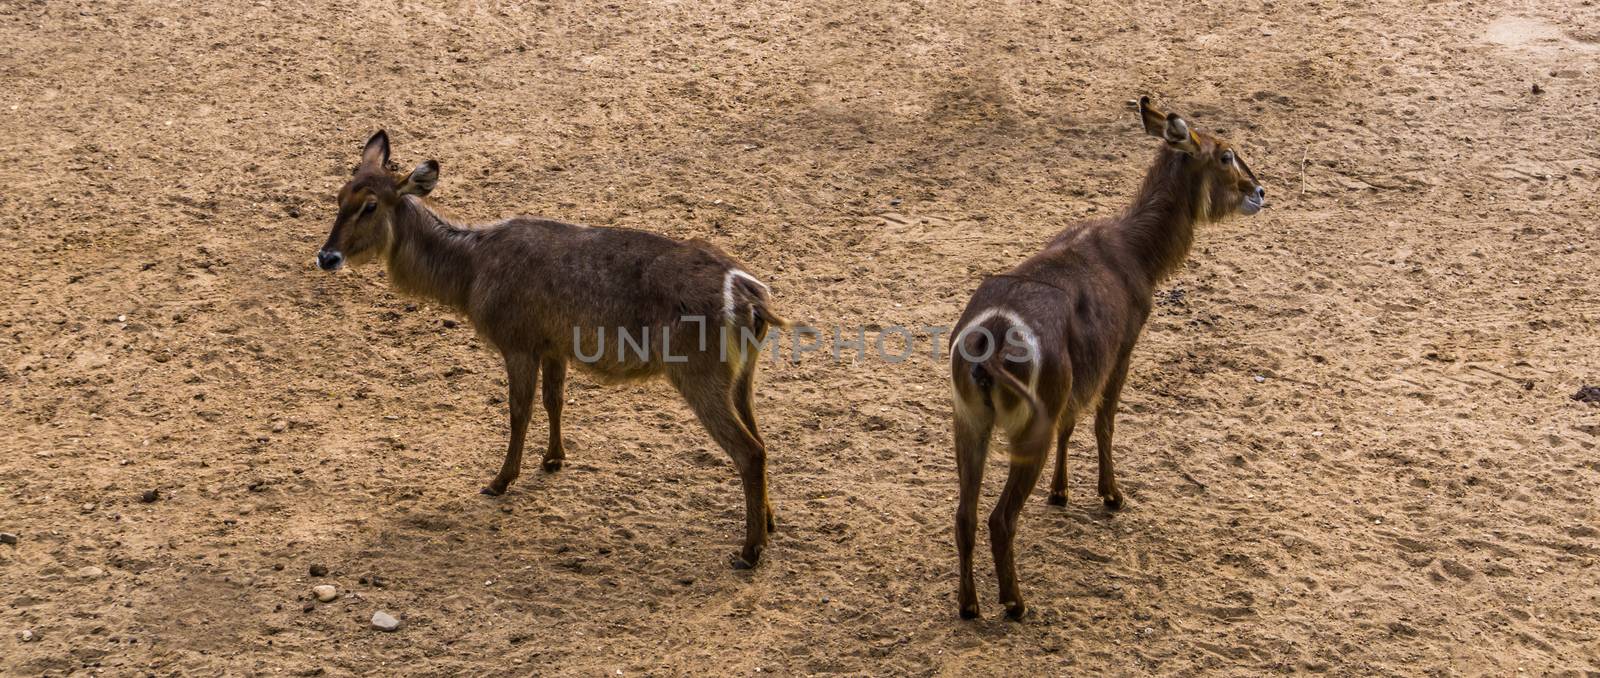 ellipsen waterbuck couple together, tropical antelope specie from Africa